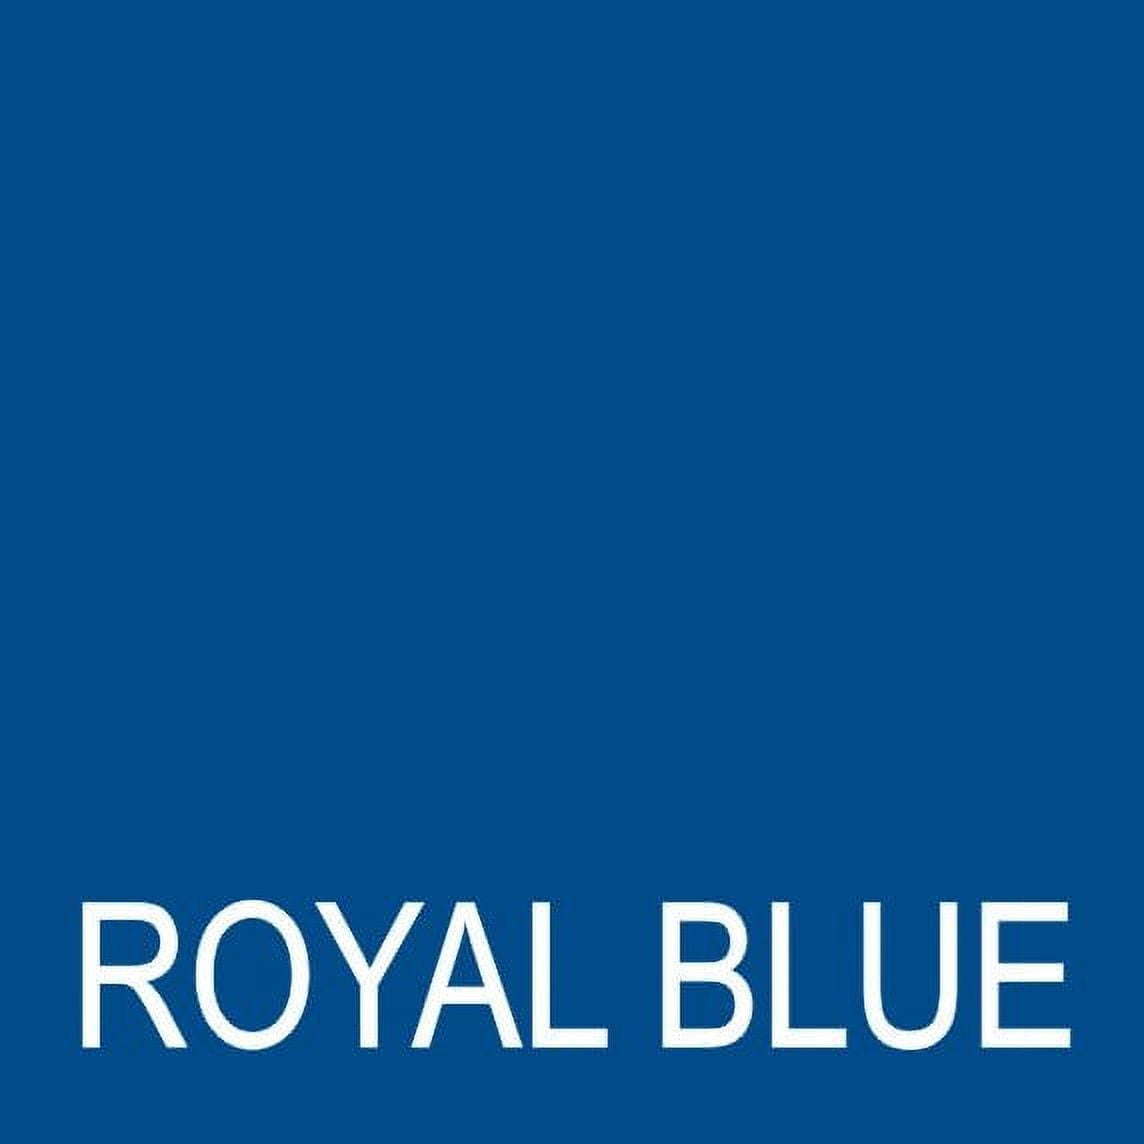 Royal Blue Iron On Vinyl - Heat Transfer Pack of Sheets